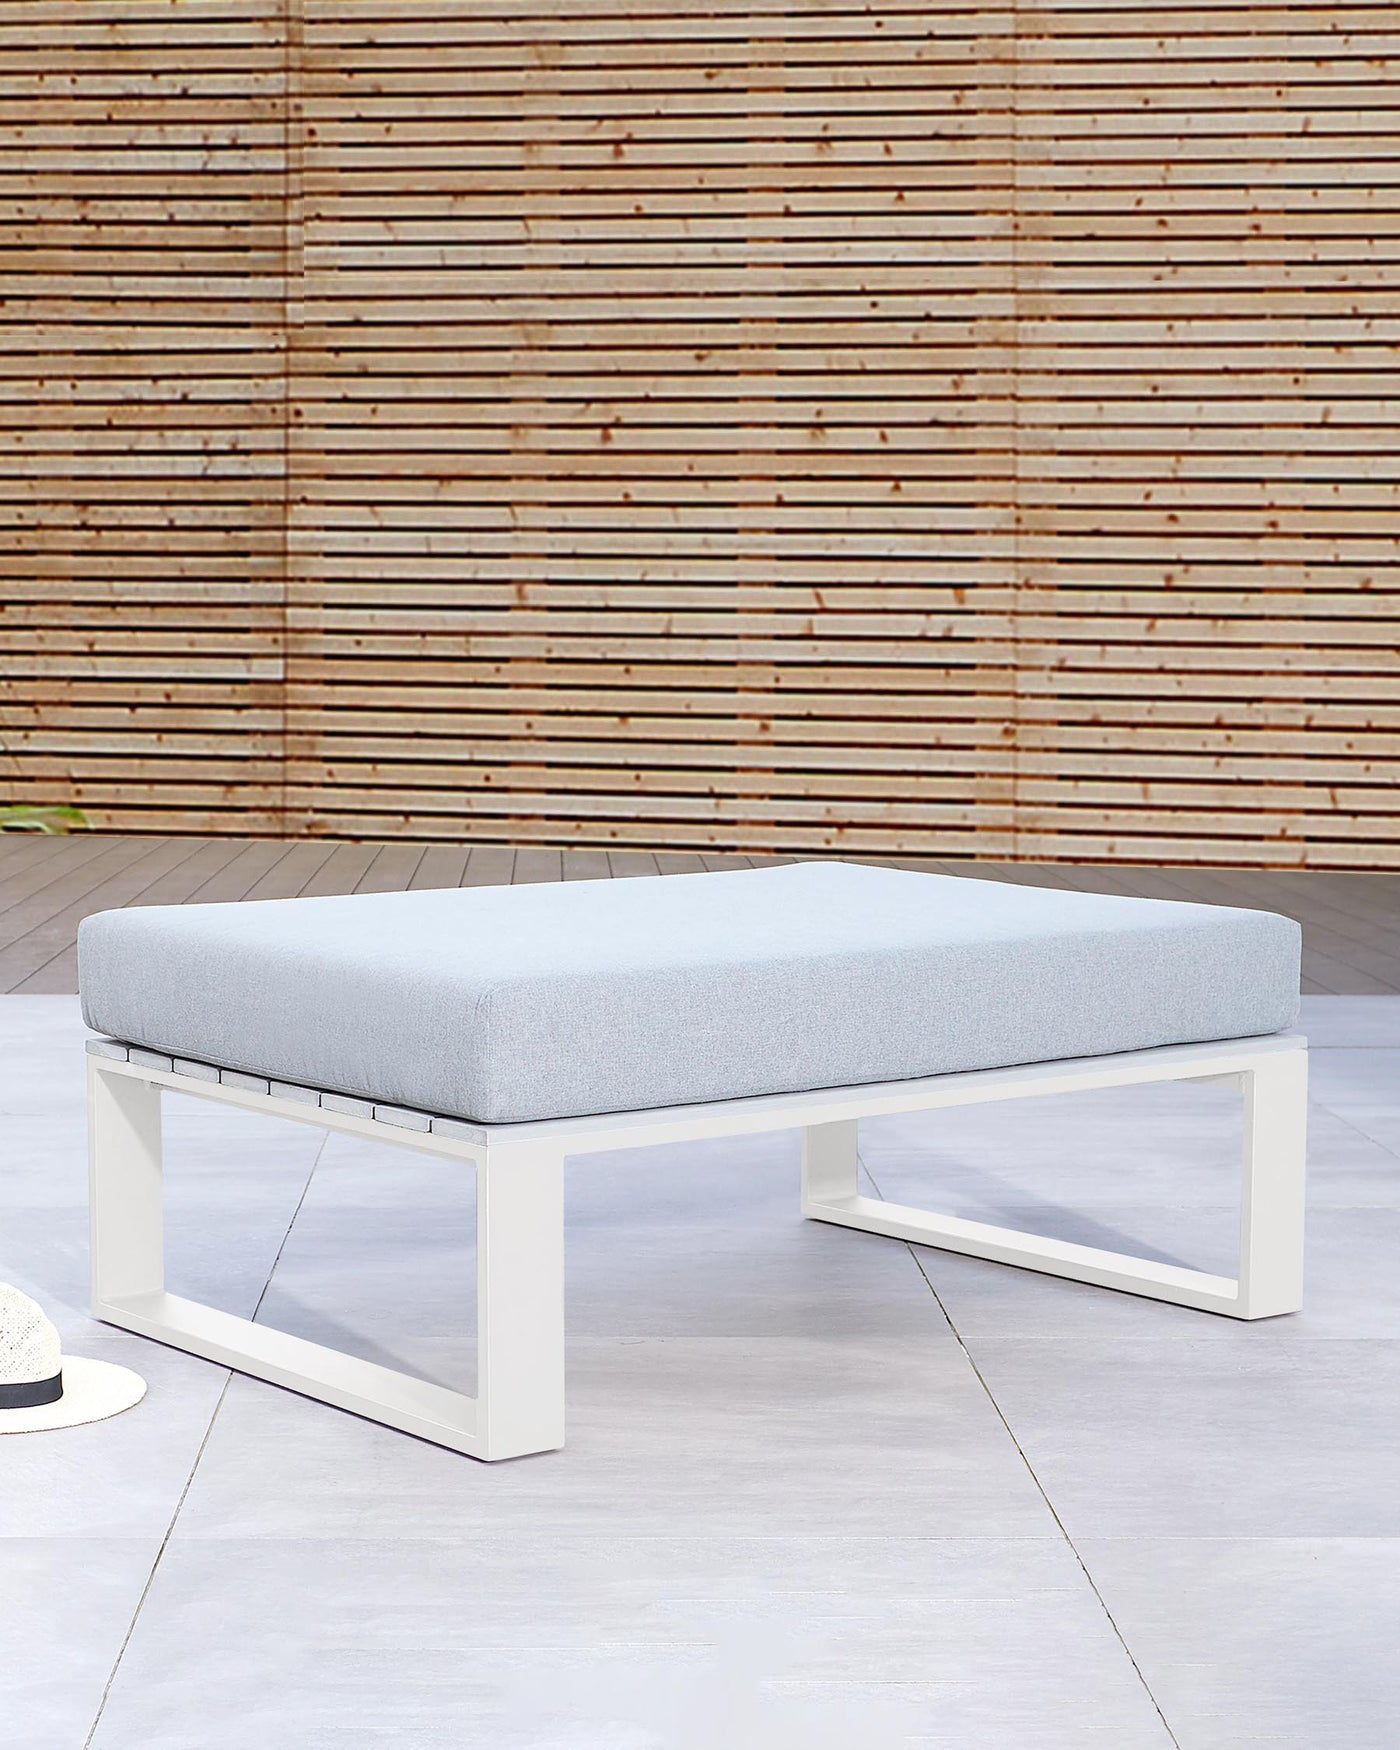 Modern outdoor ottoman with a white metal frame and light grey cushion, displayed on a pale floor against a wooden slat backdrop.